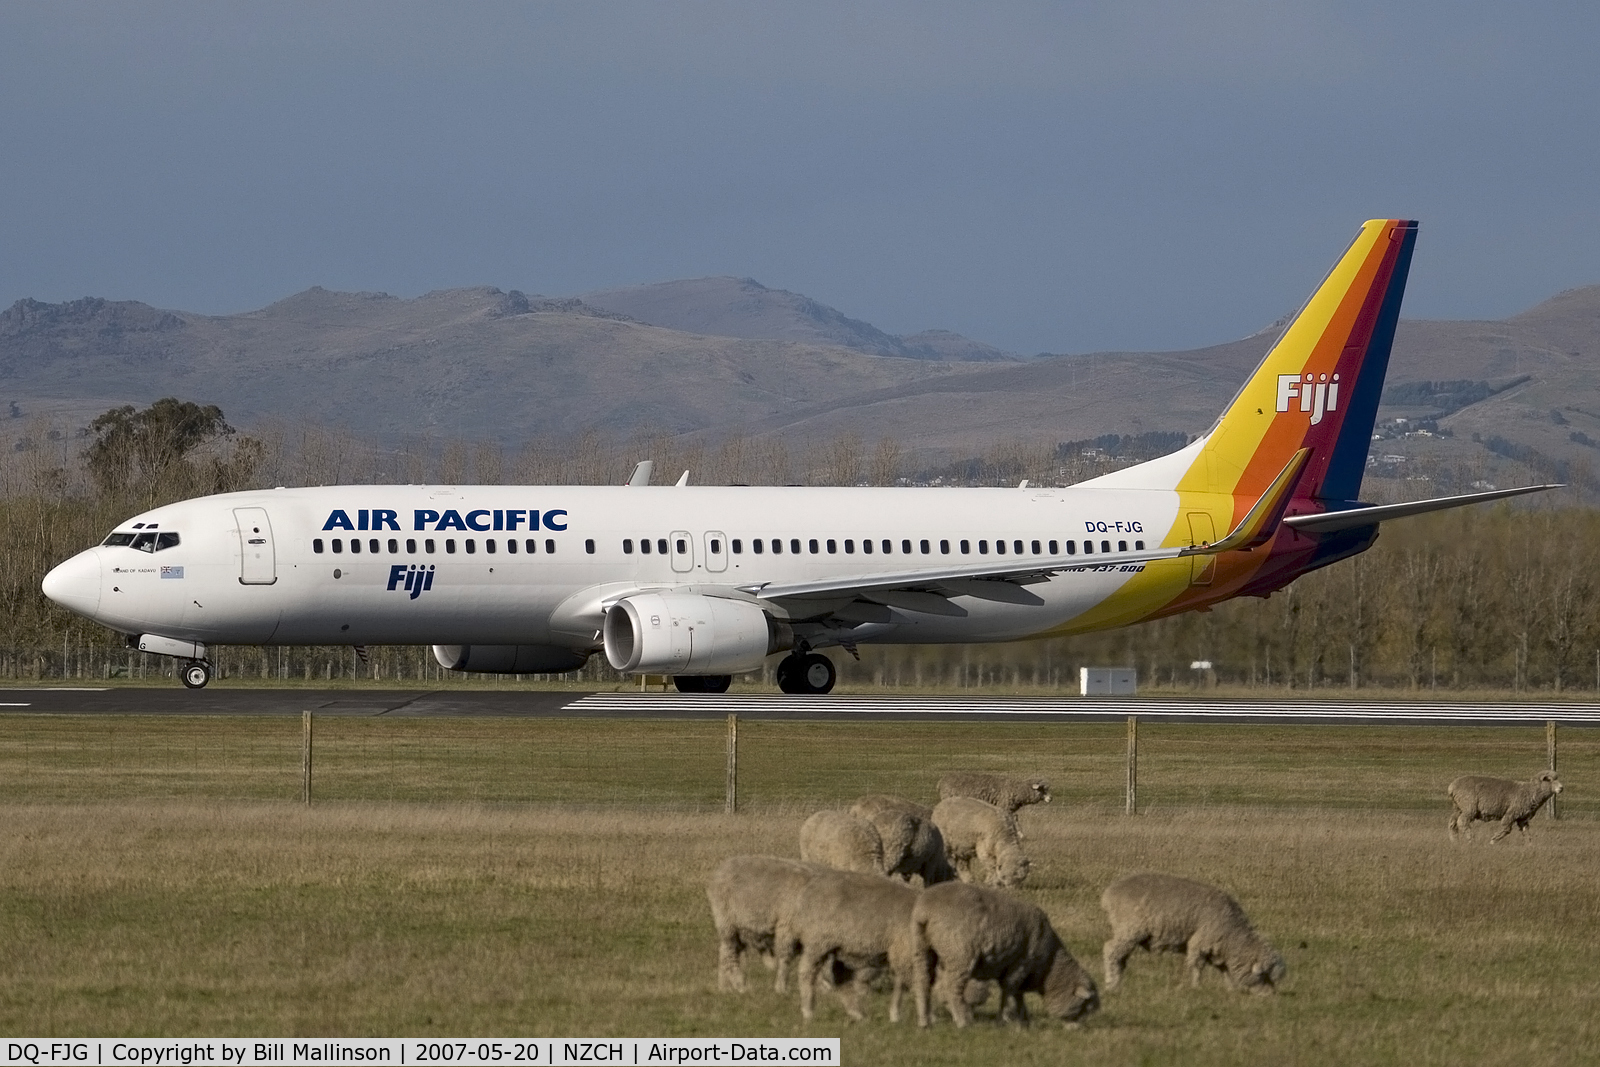 DQ-FJG, 1999 Boeing 737-8X2 C/N 29968, and the sheep just ignore it